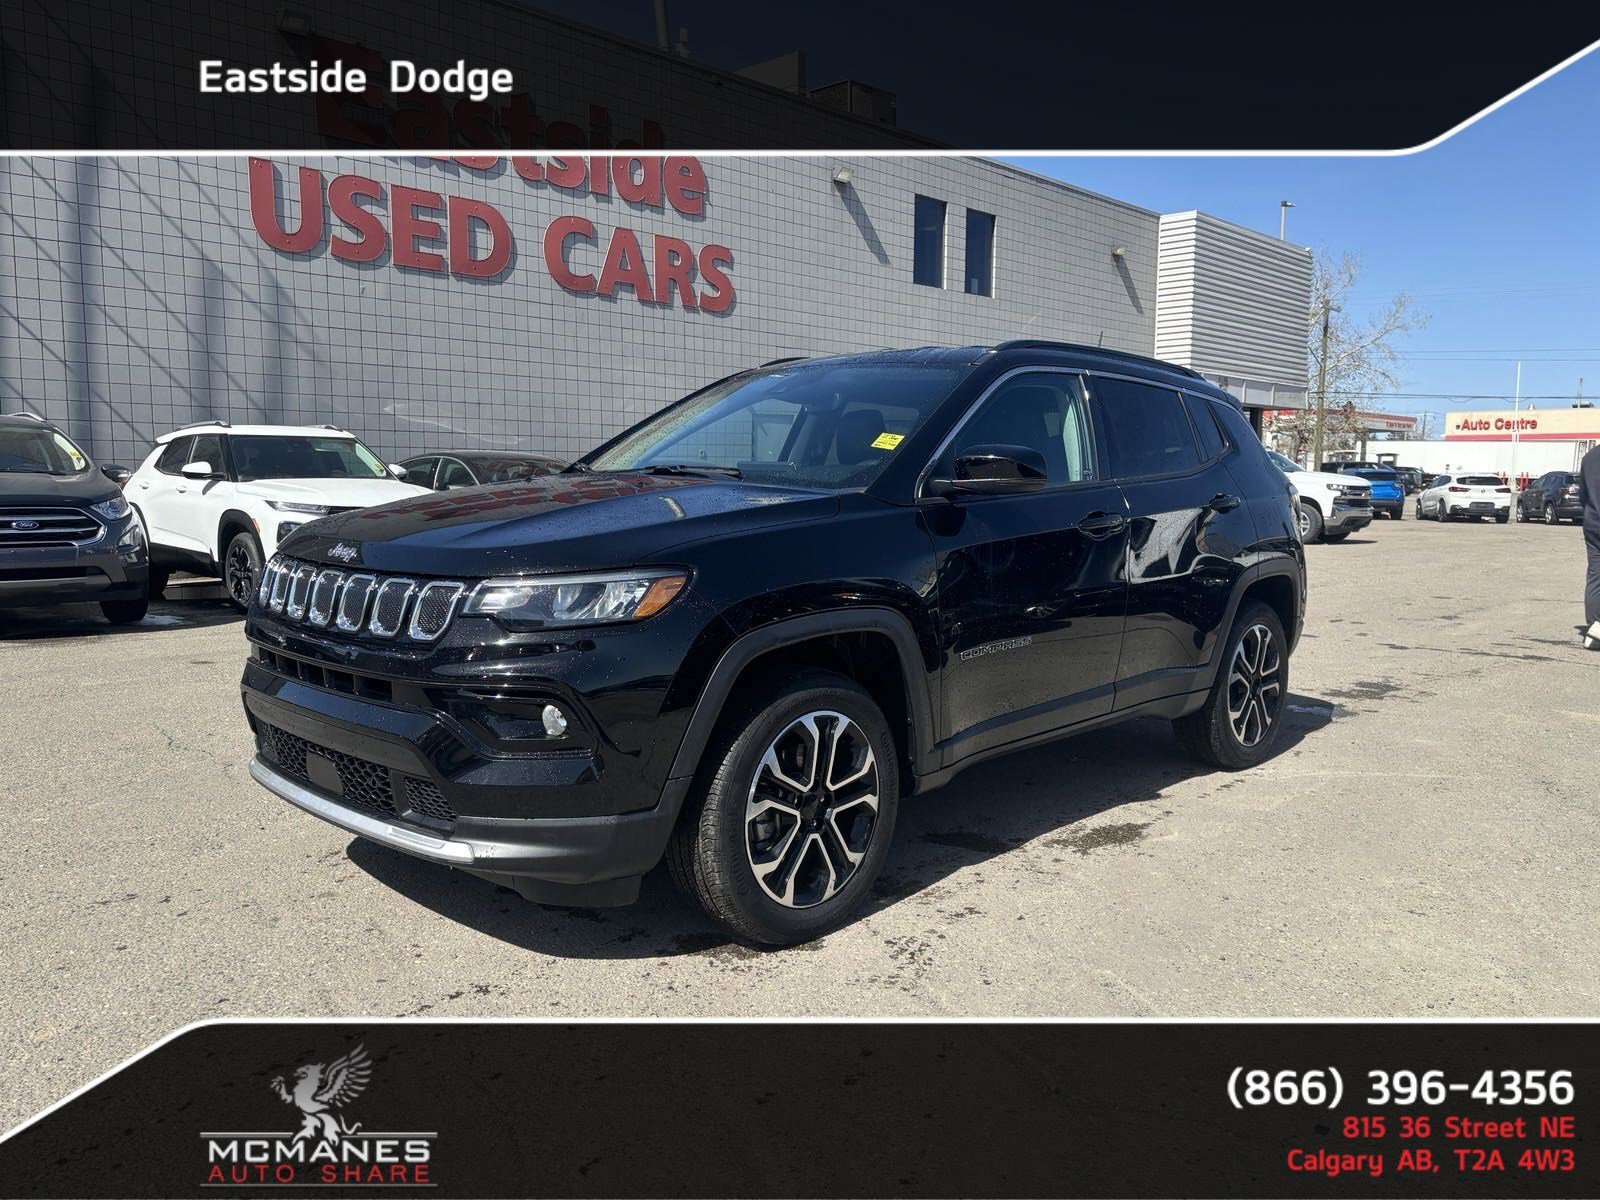 2022 Jeep Compass Limited 4X4